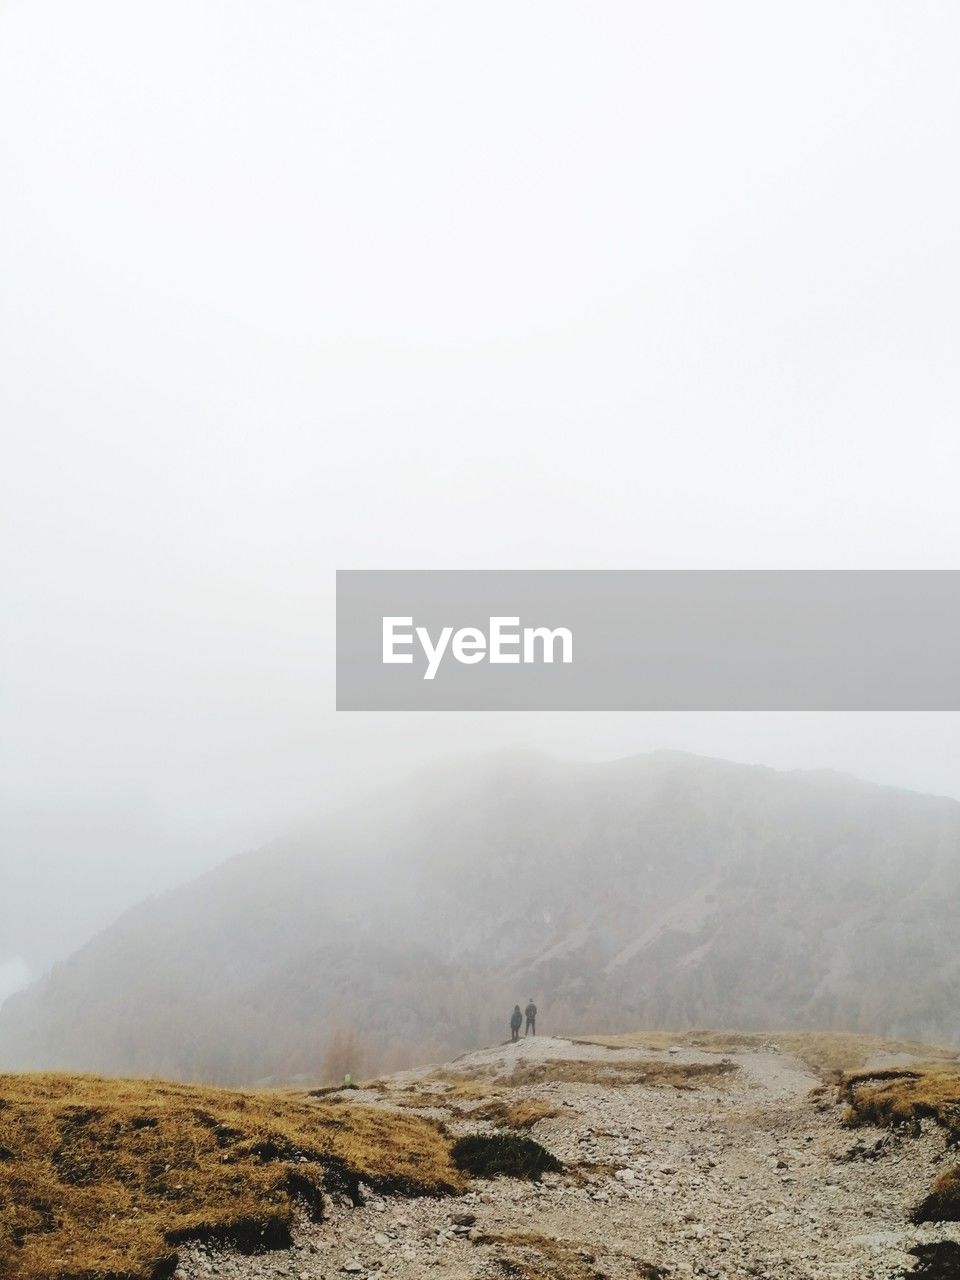 fog, mountain, environment, landscape, scenics - nature, nature, beauty in nature, sky, tranquility, copy space, land, non-urban scene, tranquil scene, no people, plateau, day, travel, mist, travel destinations, outdoors, mountain range, morning, remote, sea, natural environment, tourism, ridge, rock